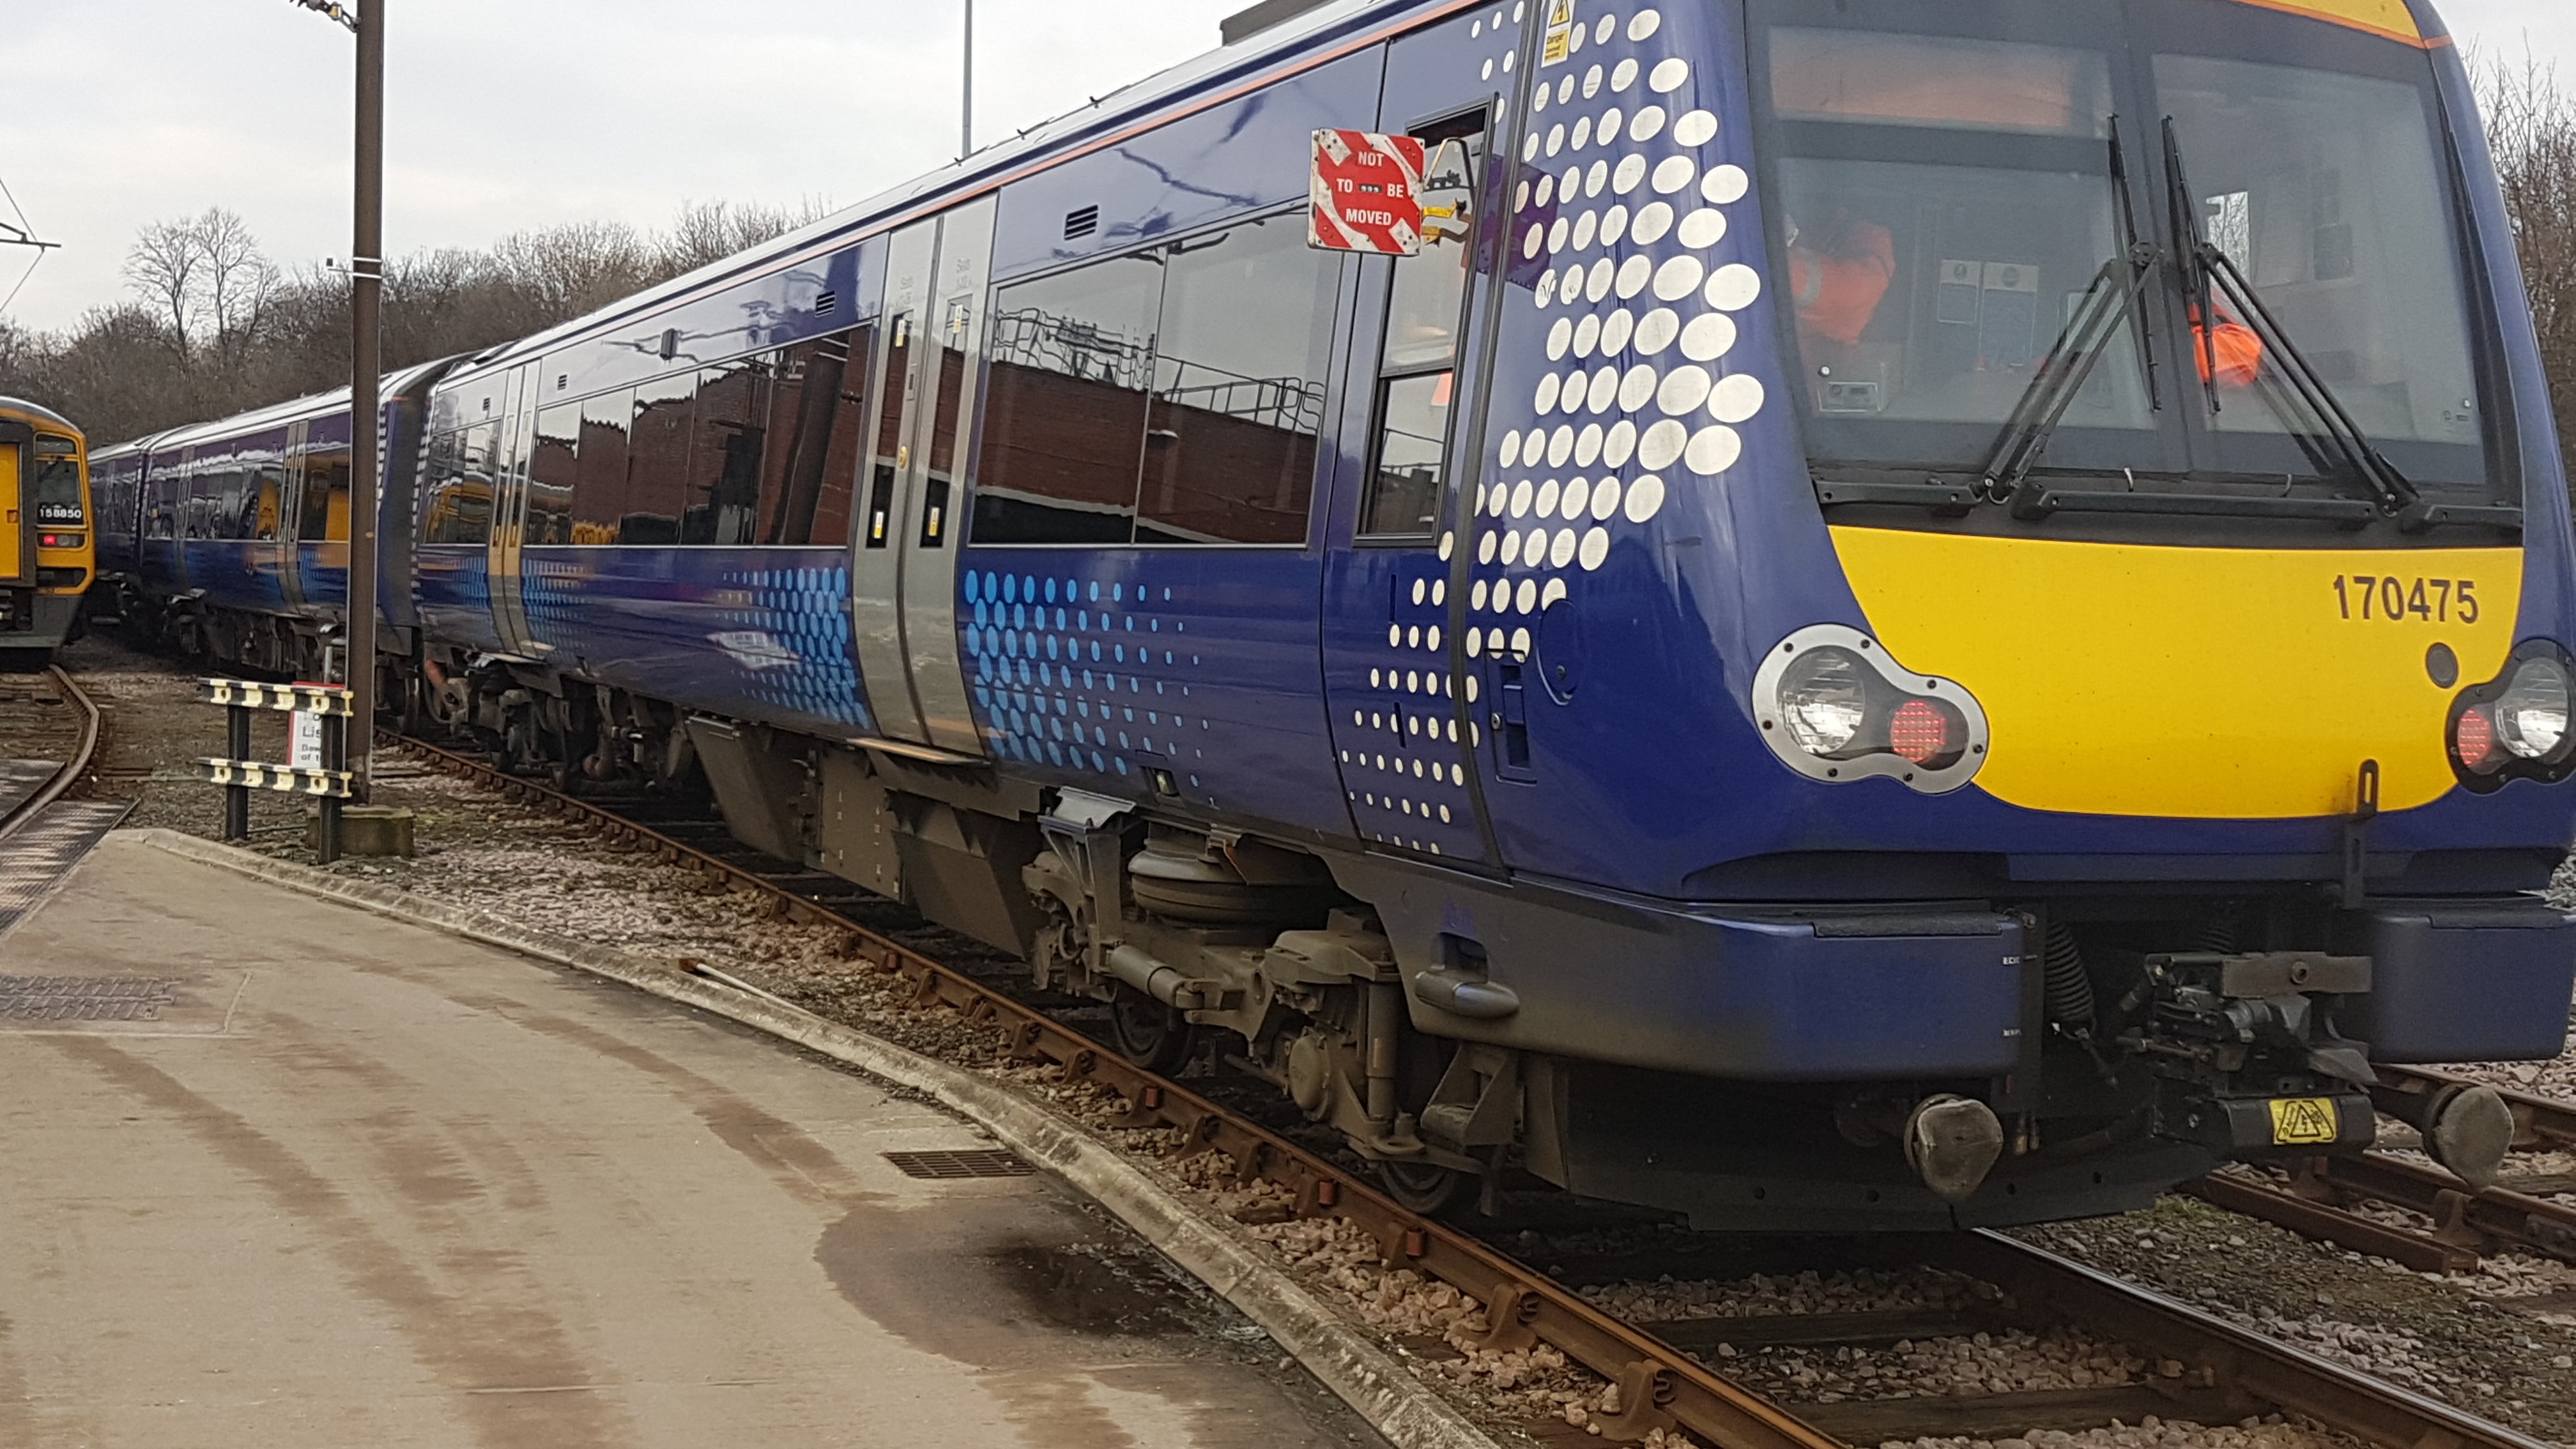 Northern has taken delivery of Class 170s from ScotRail